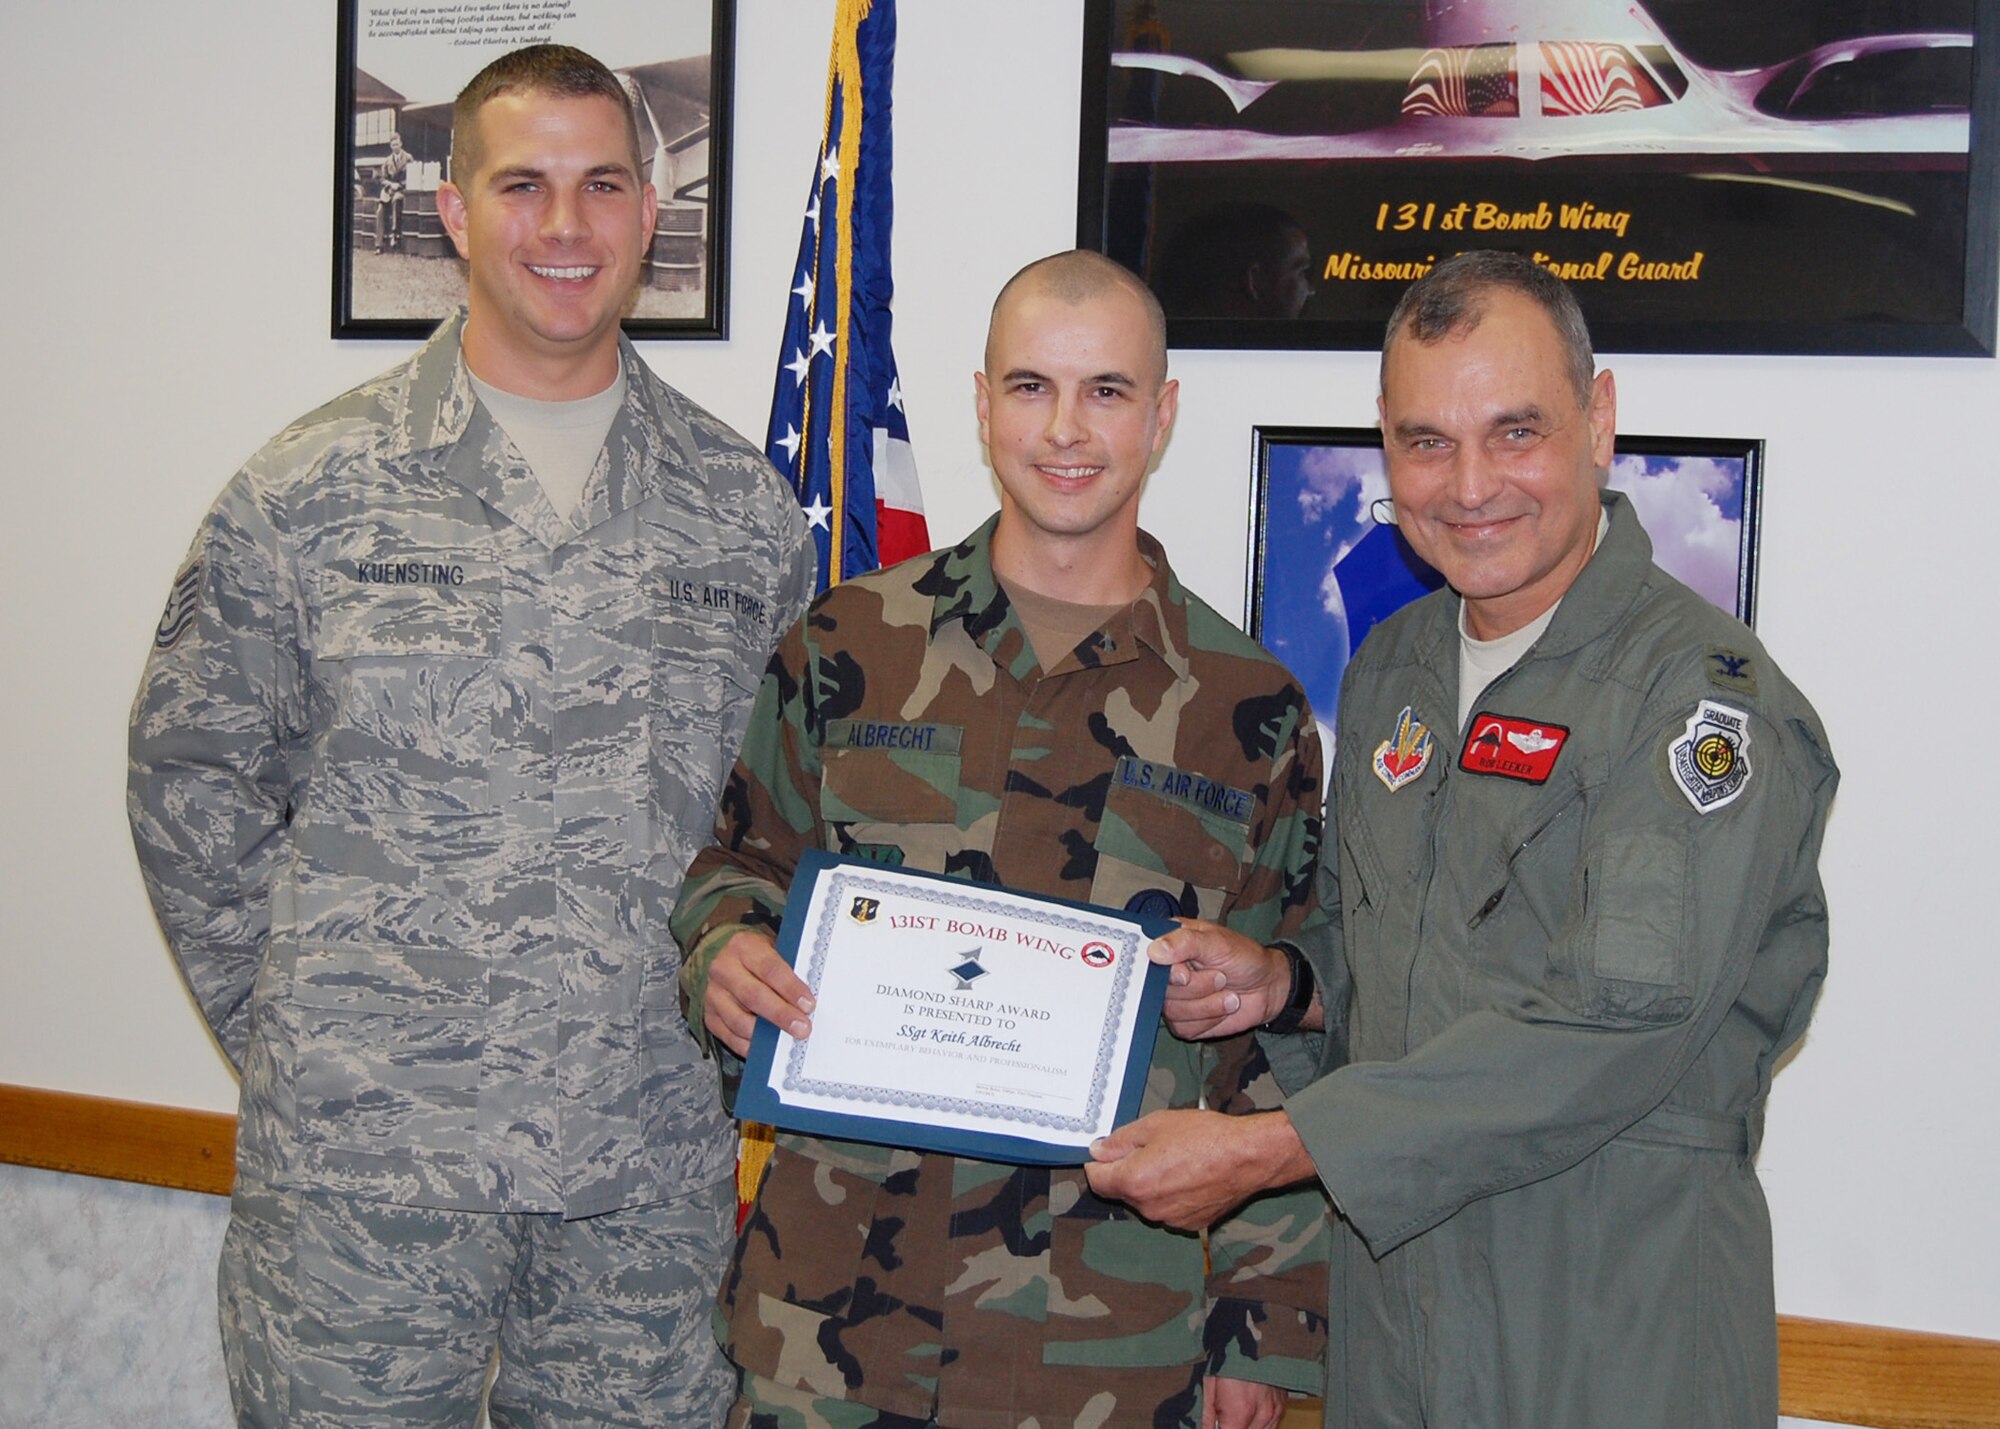 Staff Sgt. Keith S. Albrecht, 239th Combat Communications Squadron voice network systems, was awarded the Diamond Sharp Award October UTA for exemplary service to the Squadron by Tech Sgt. Matthew Kuensting, 239th CBCS acting 1st Sergeant.  The Diamond Sharp Award is an award given by 1st Sergeant's to honor Airmen for their outstanding overall performance. (Photo by Master Sgt. Mary-Dale Amison)